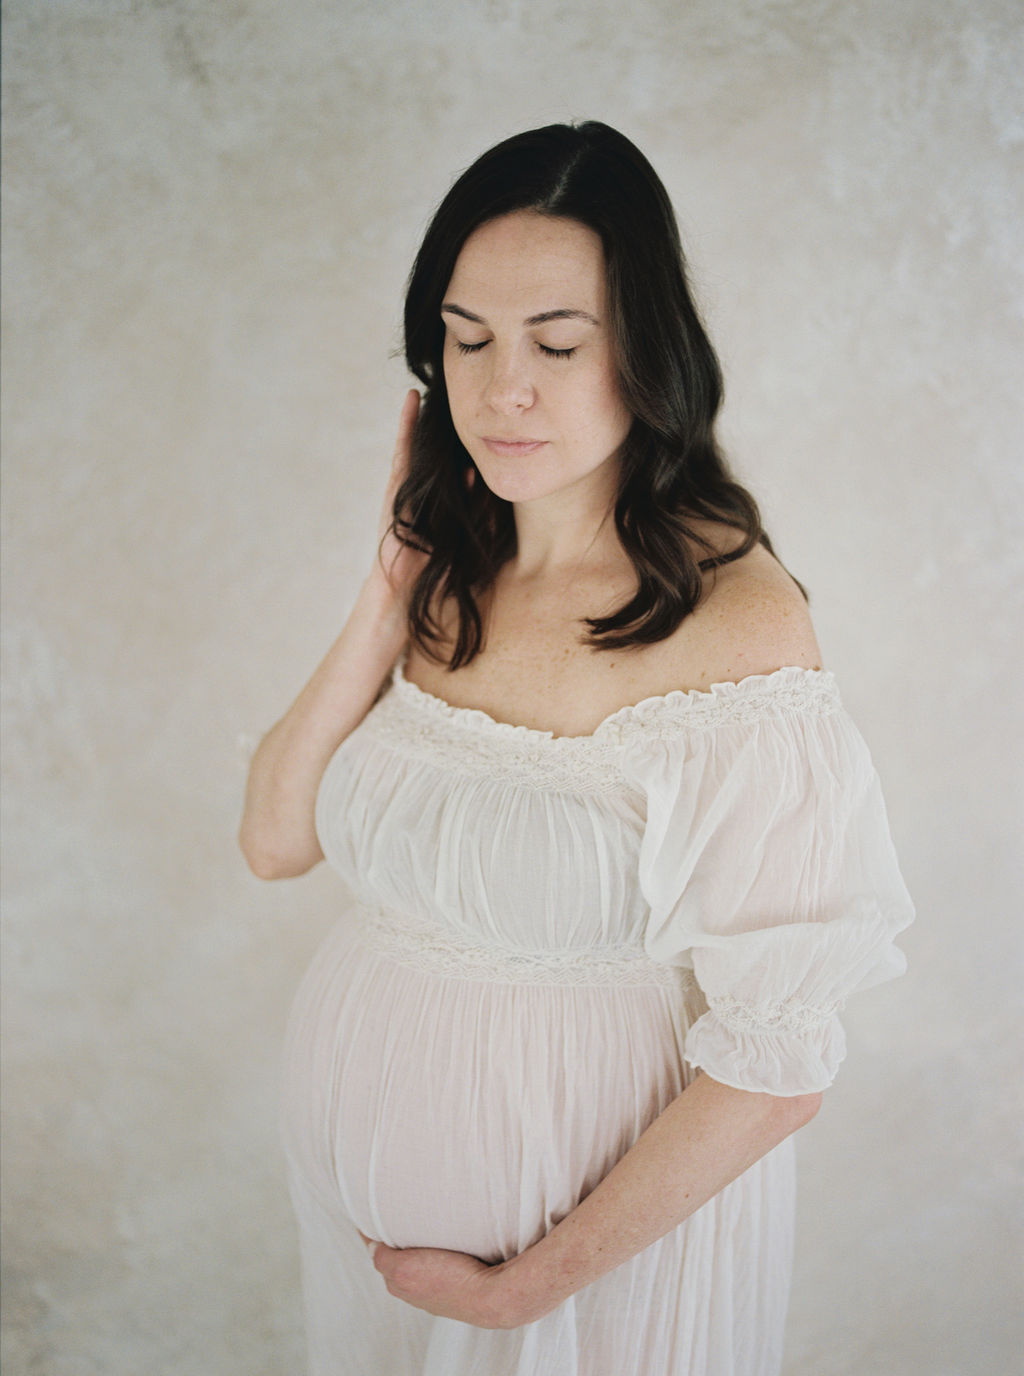 A mom to be in a white maternity dress runs a hand through her hair while standing in a studio